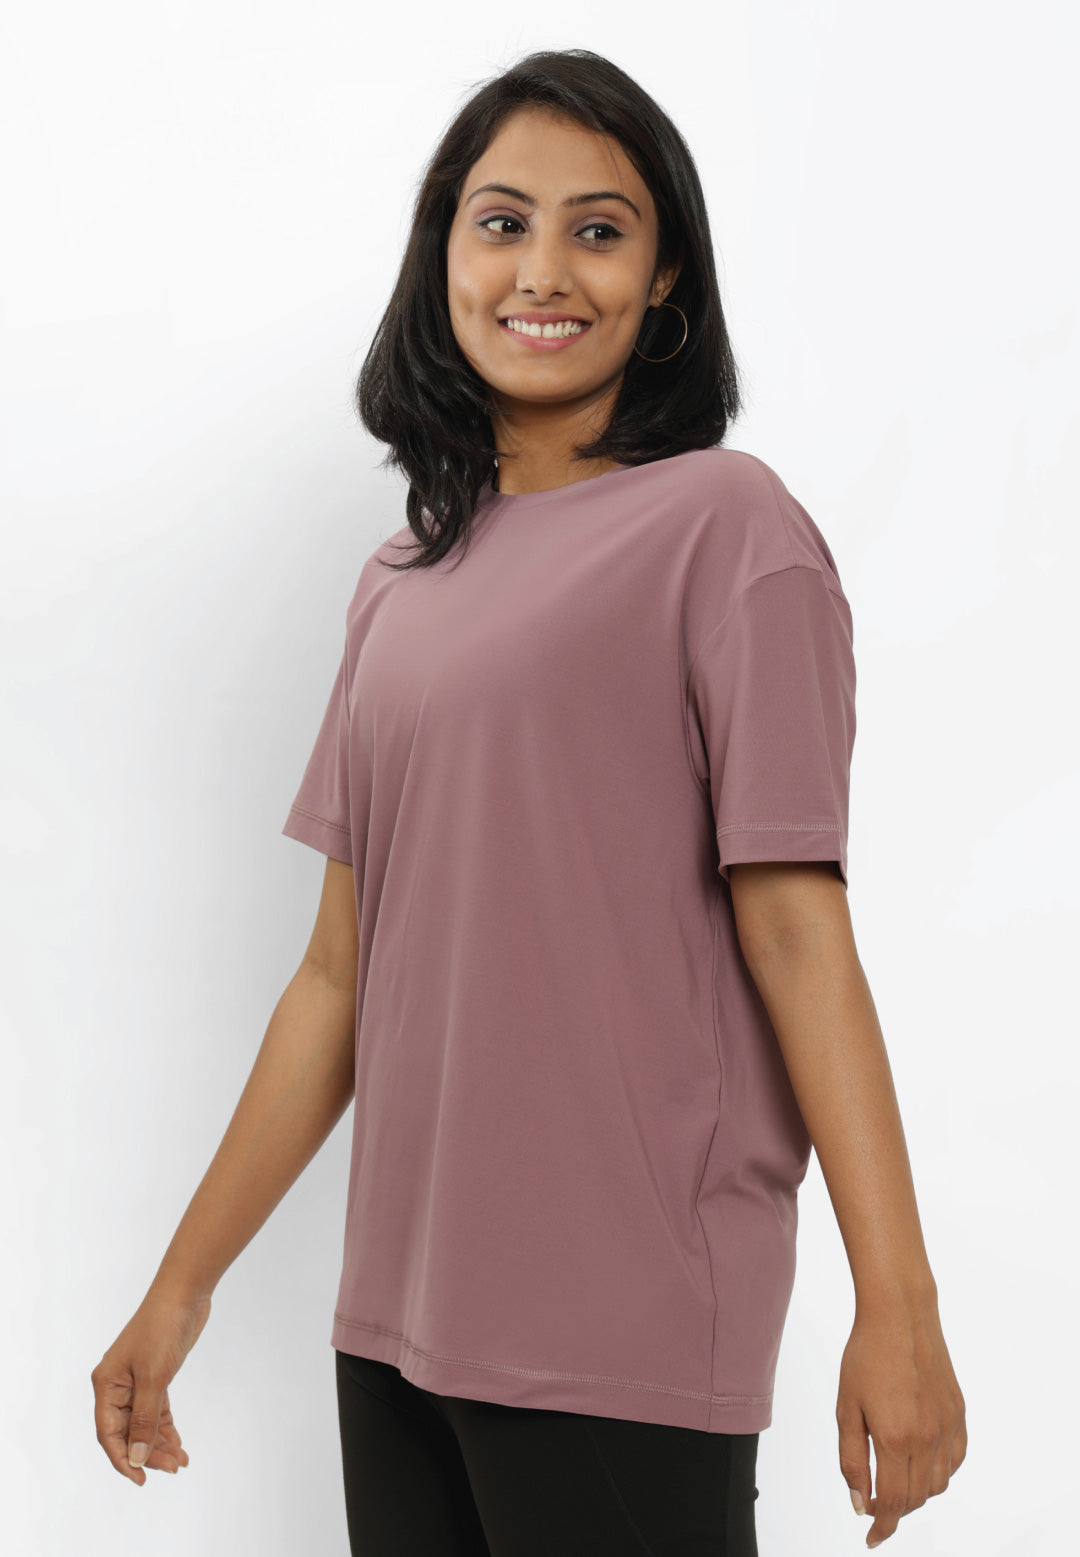 Women's T-shirts - Buy T-Shirts for Ladies Online from Blissclub